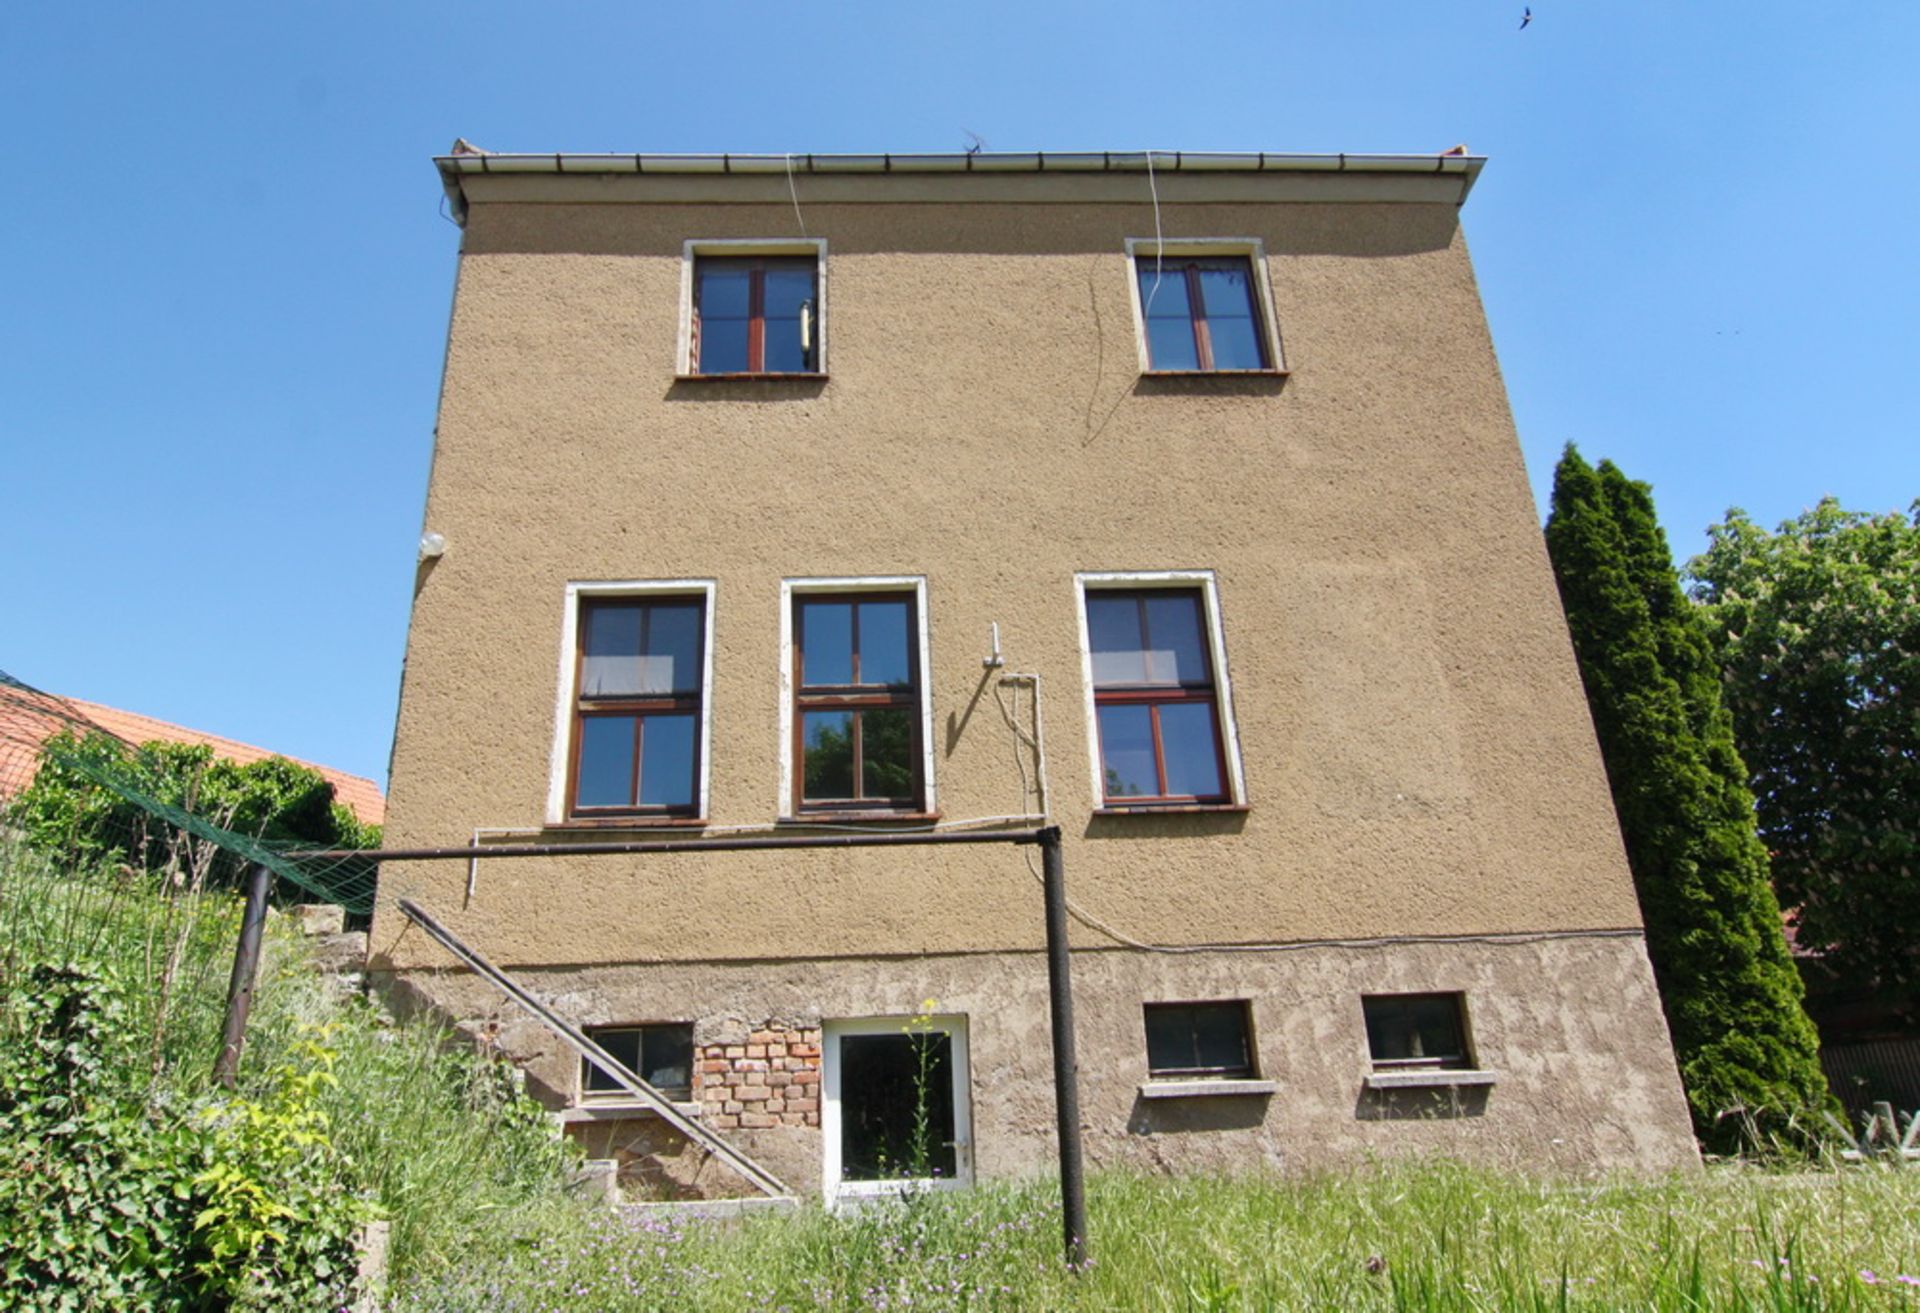 LARGE HOUSING BLOCK IN HORNSOMMEM, GERMANY - READY TO MOVE INTO - Image 9 of 91